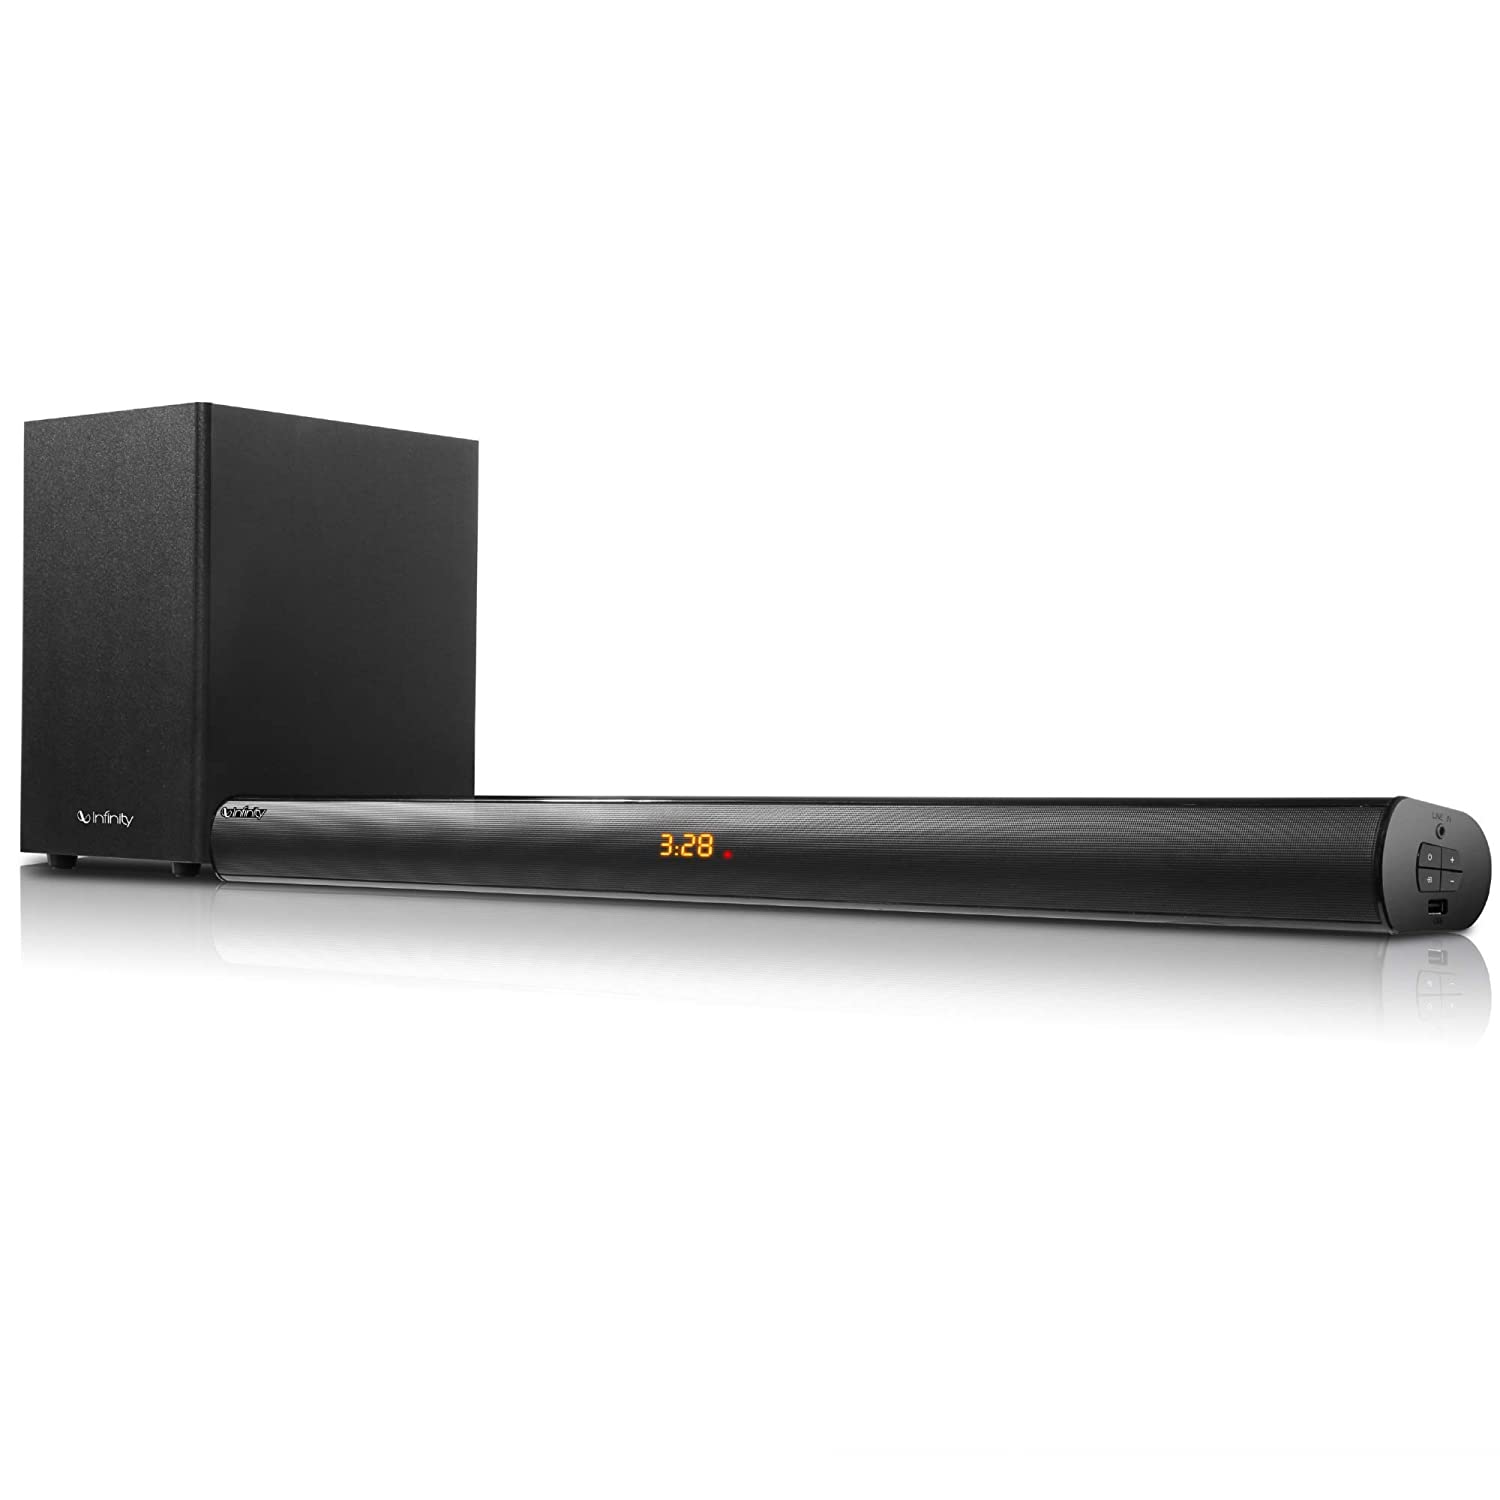 Amazon Sale: Not only Diwali, this sound bar is the life of every festival and party, buy best seller sound bar in Amazon Sale